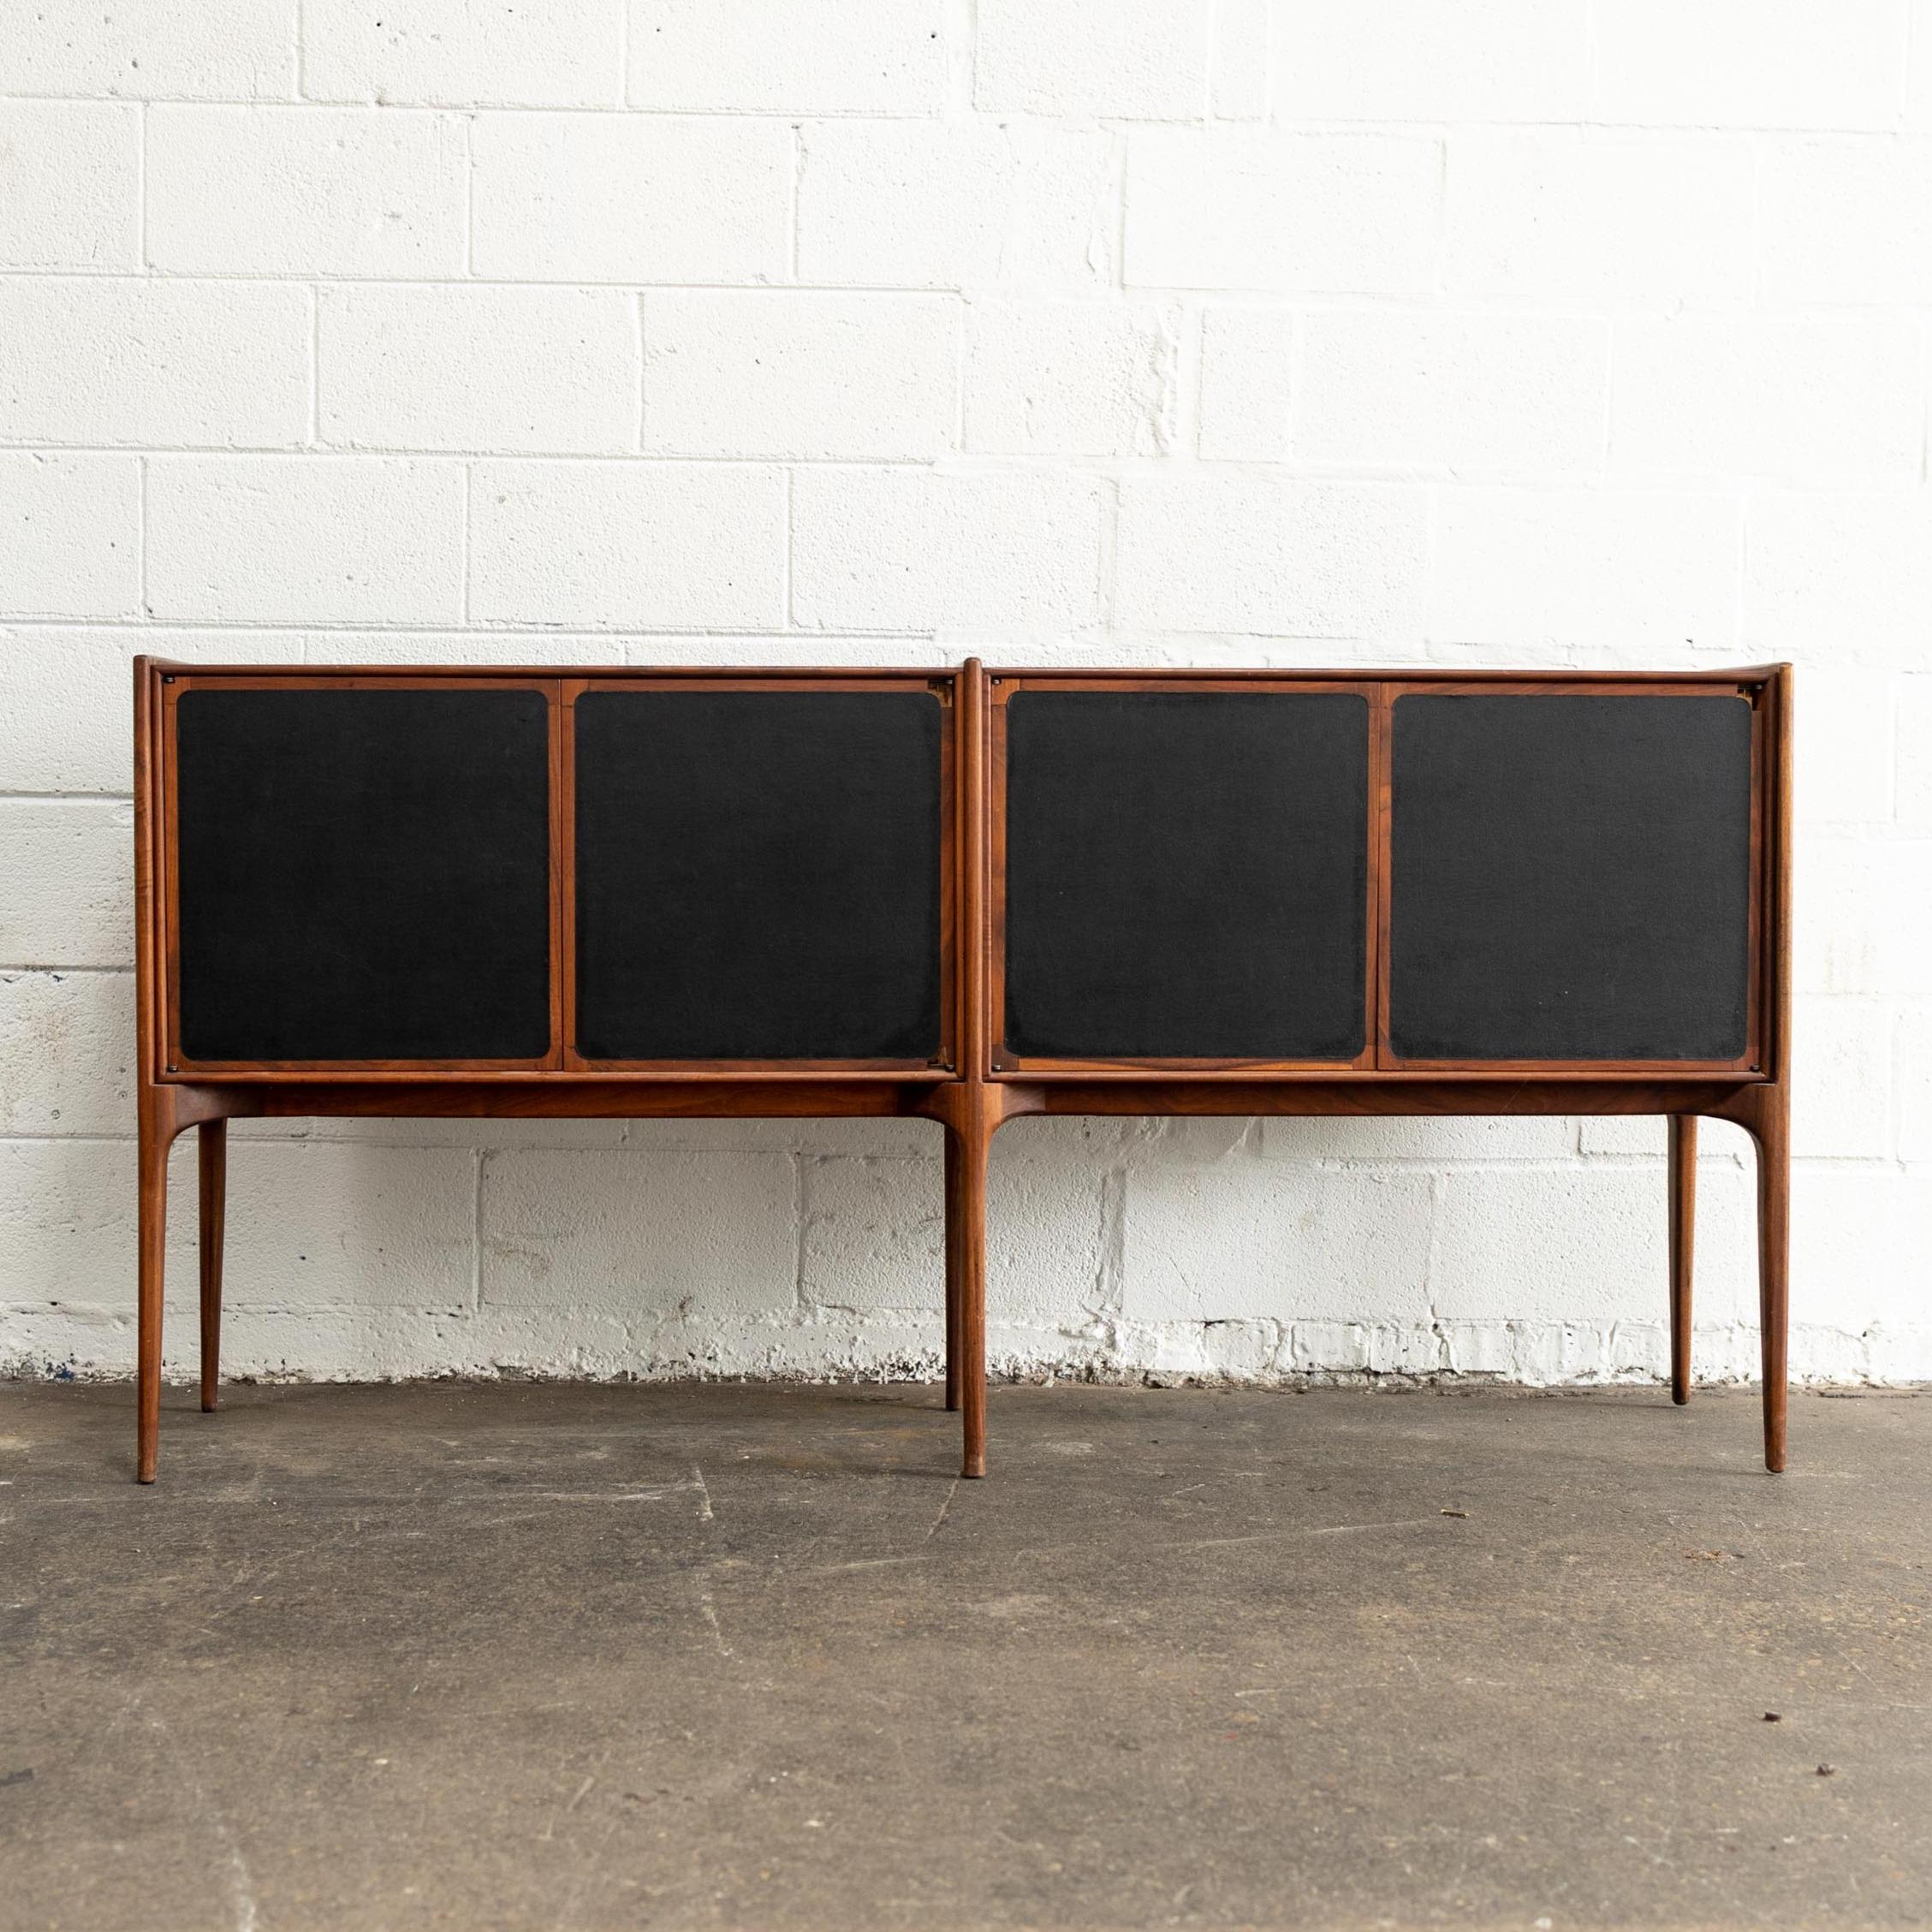 Unknown designer but likely American-made. Features large sections of solid walnut, hand-sculpted pulls, modular shelving, Italian-inspired legs, and record storage. This piece is priced with restoration in mind.